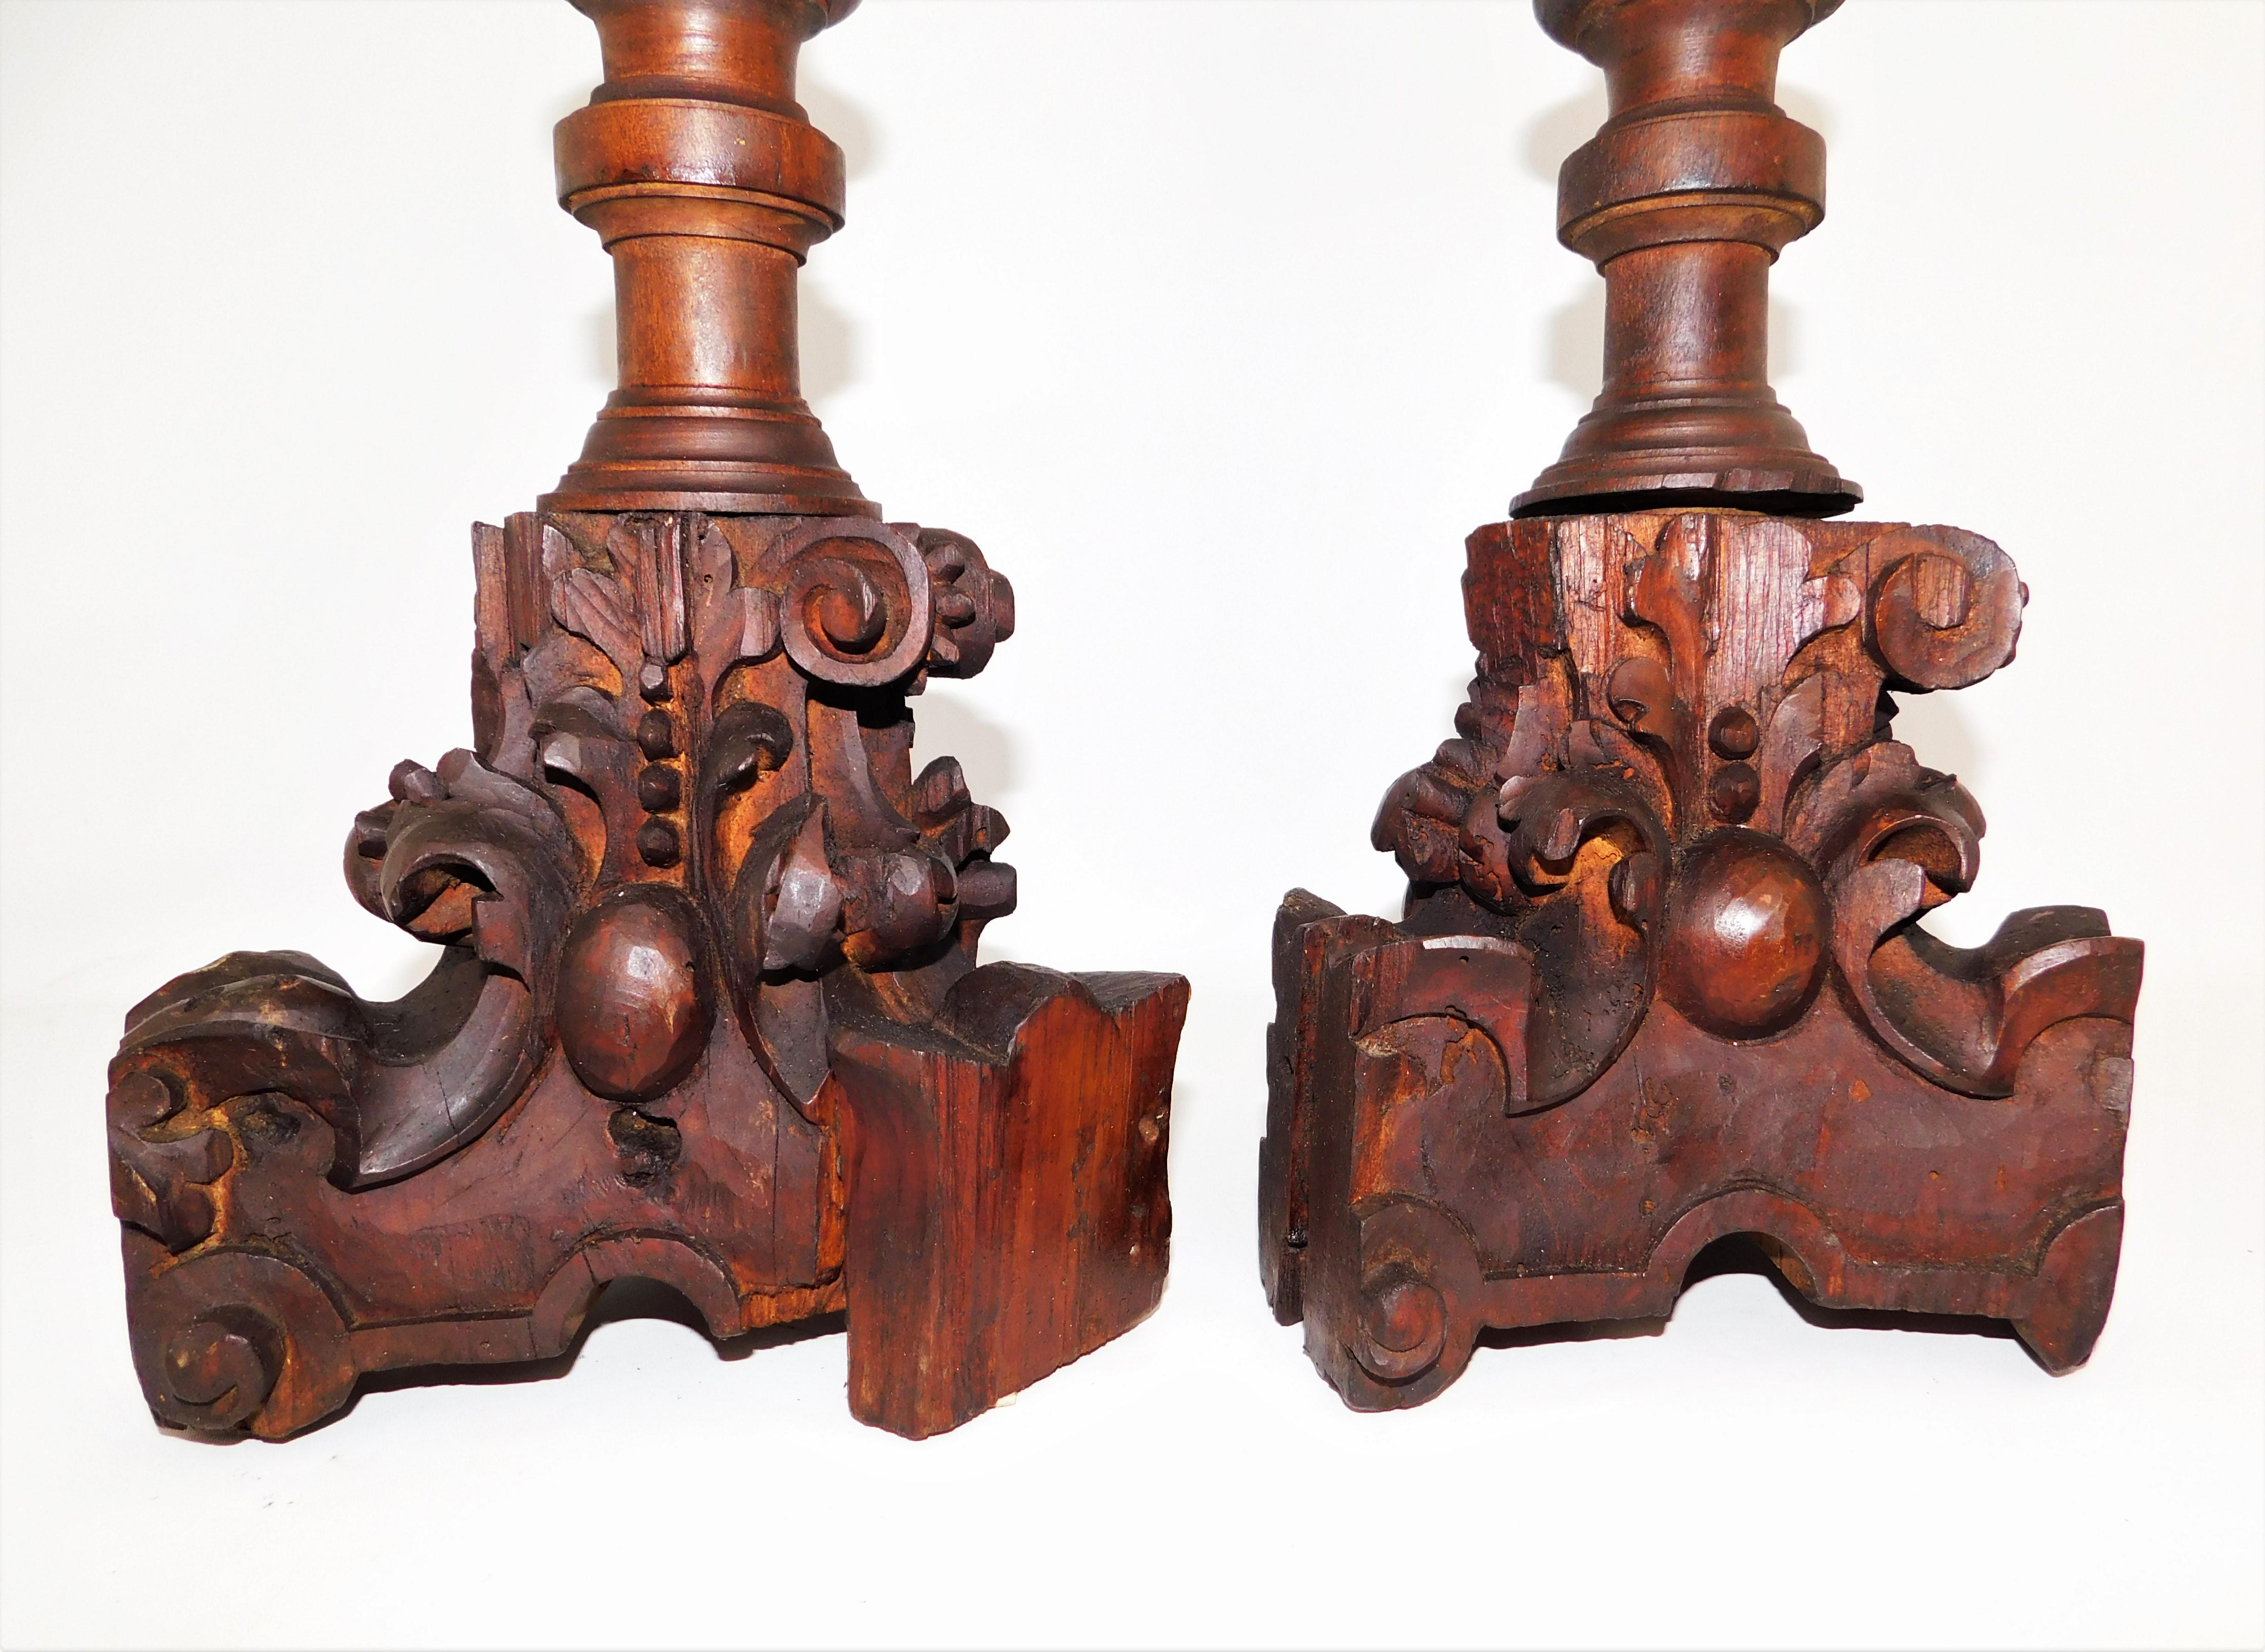 Pair of Tall Mid-19th Century Traditional Rustic Wood Candlesticks For Sale 1